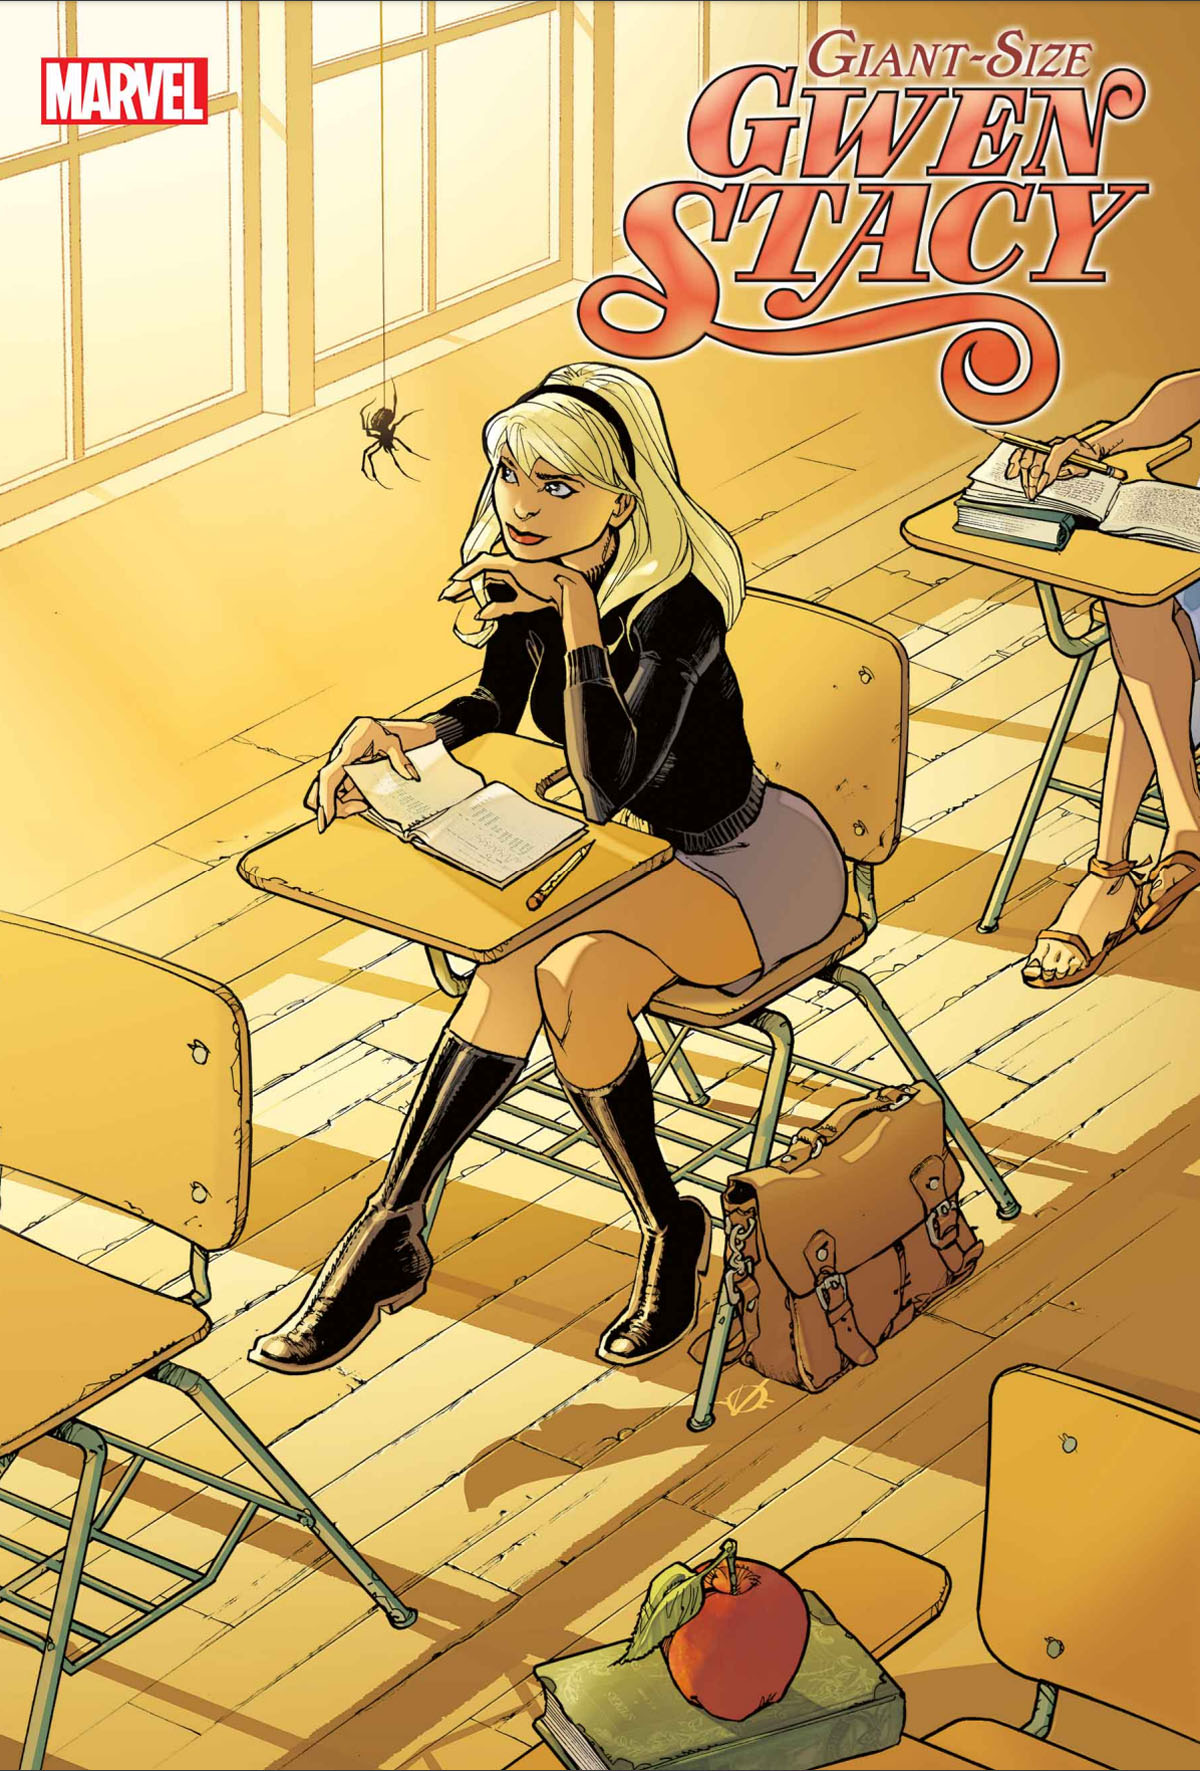 Giant-Size Gwen Stacy #1 cover